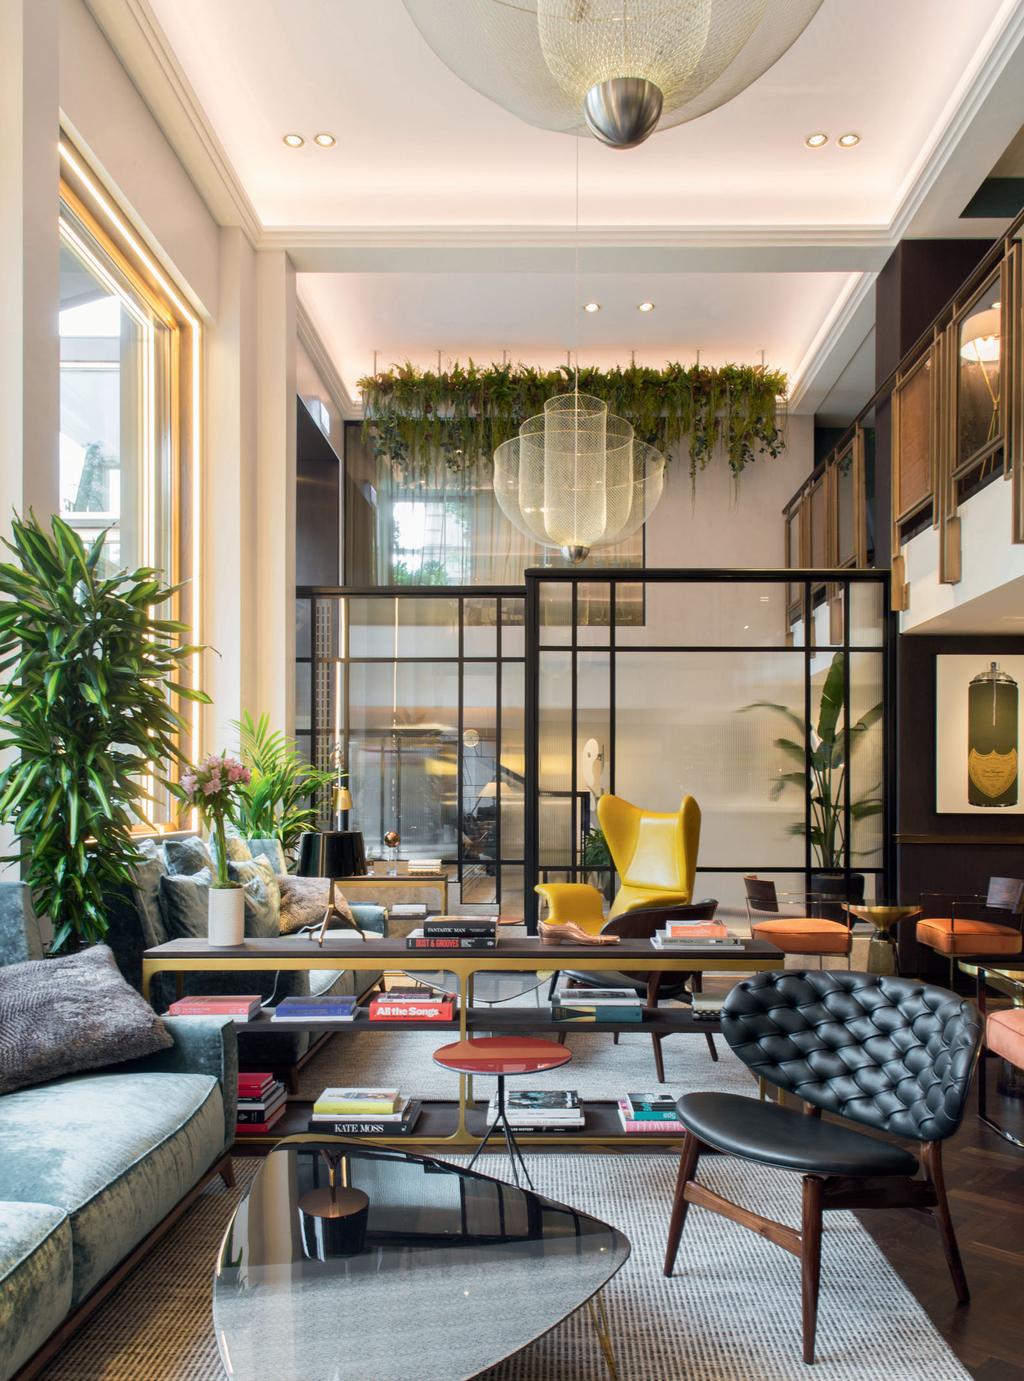 Staying INDIVIDUAL RETAINING THE OLD CHARM, KINNERSLEY KENT DESIGN REDESIGNS THE ATHENAEUM HOTEL & RESIDENCES, ONE OF